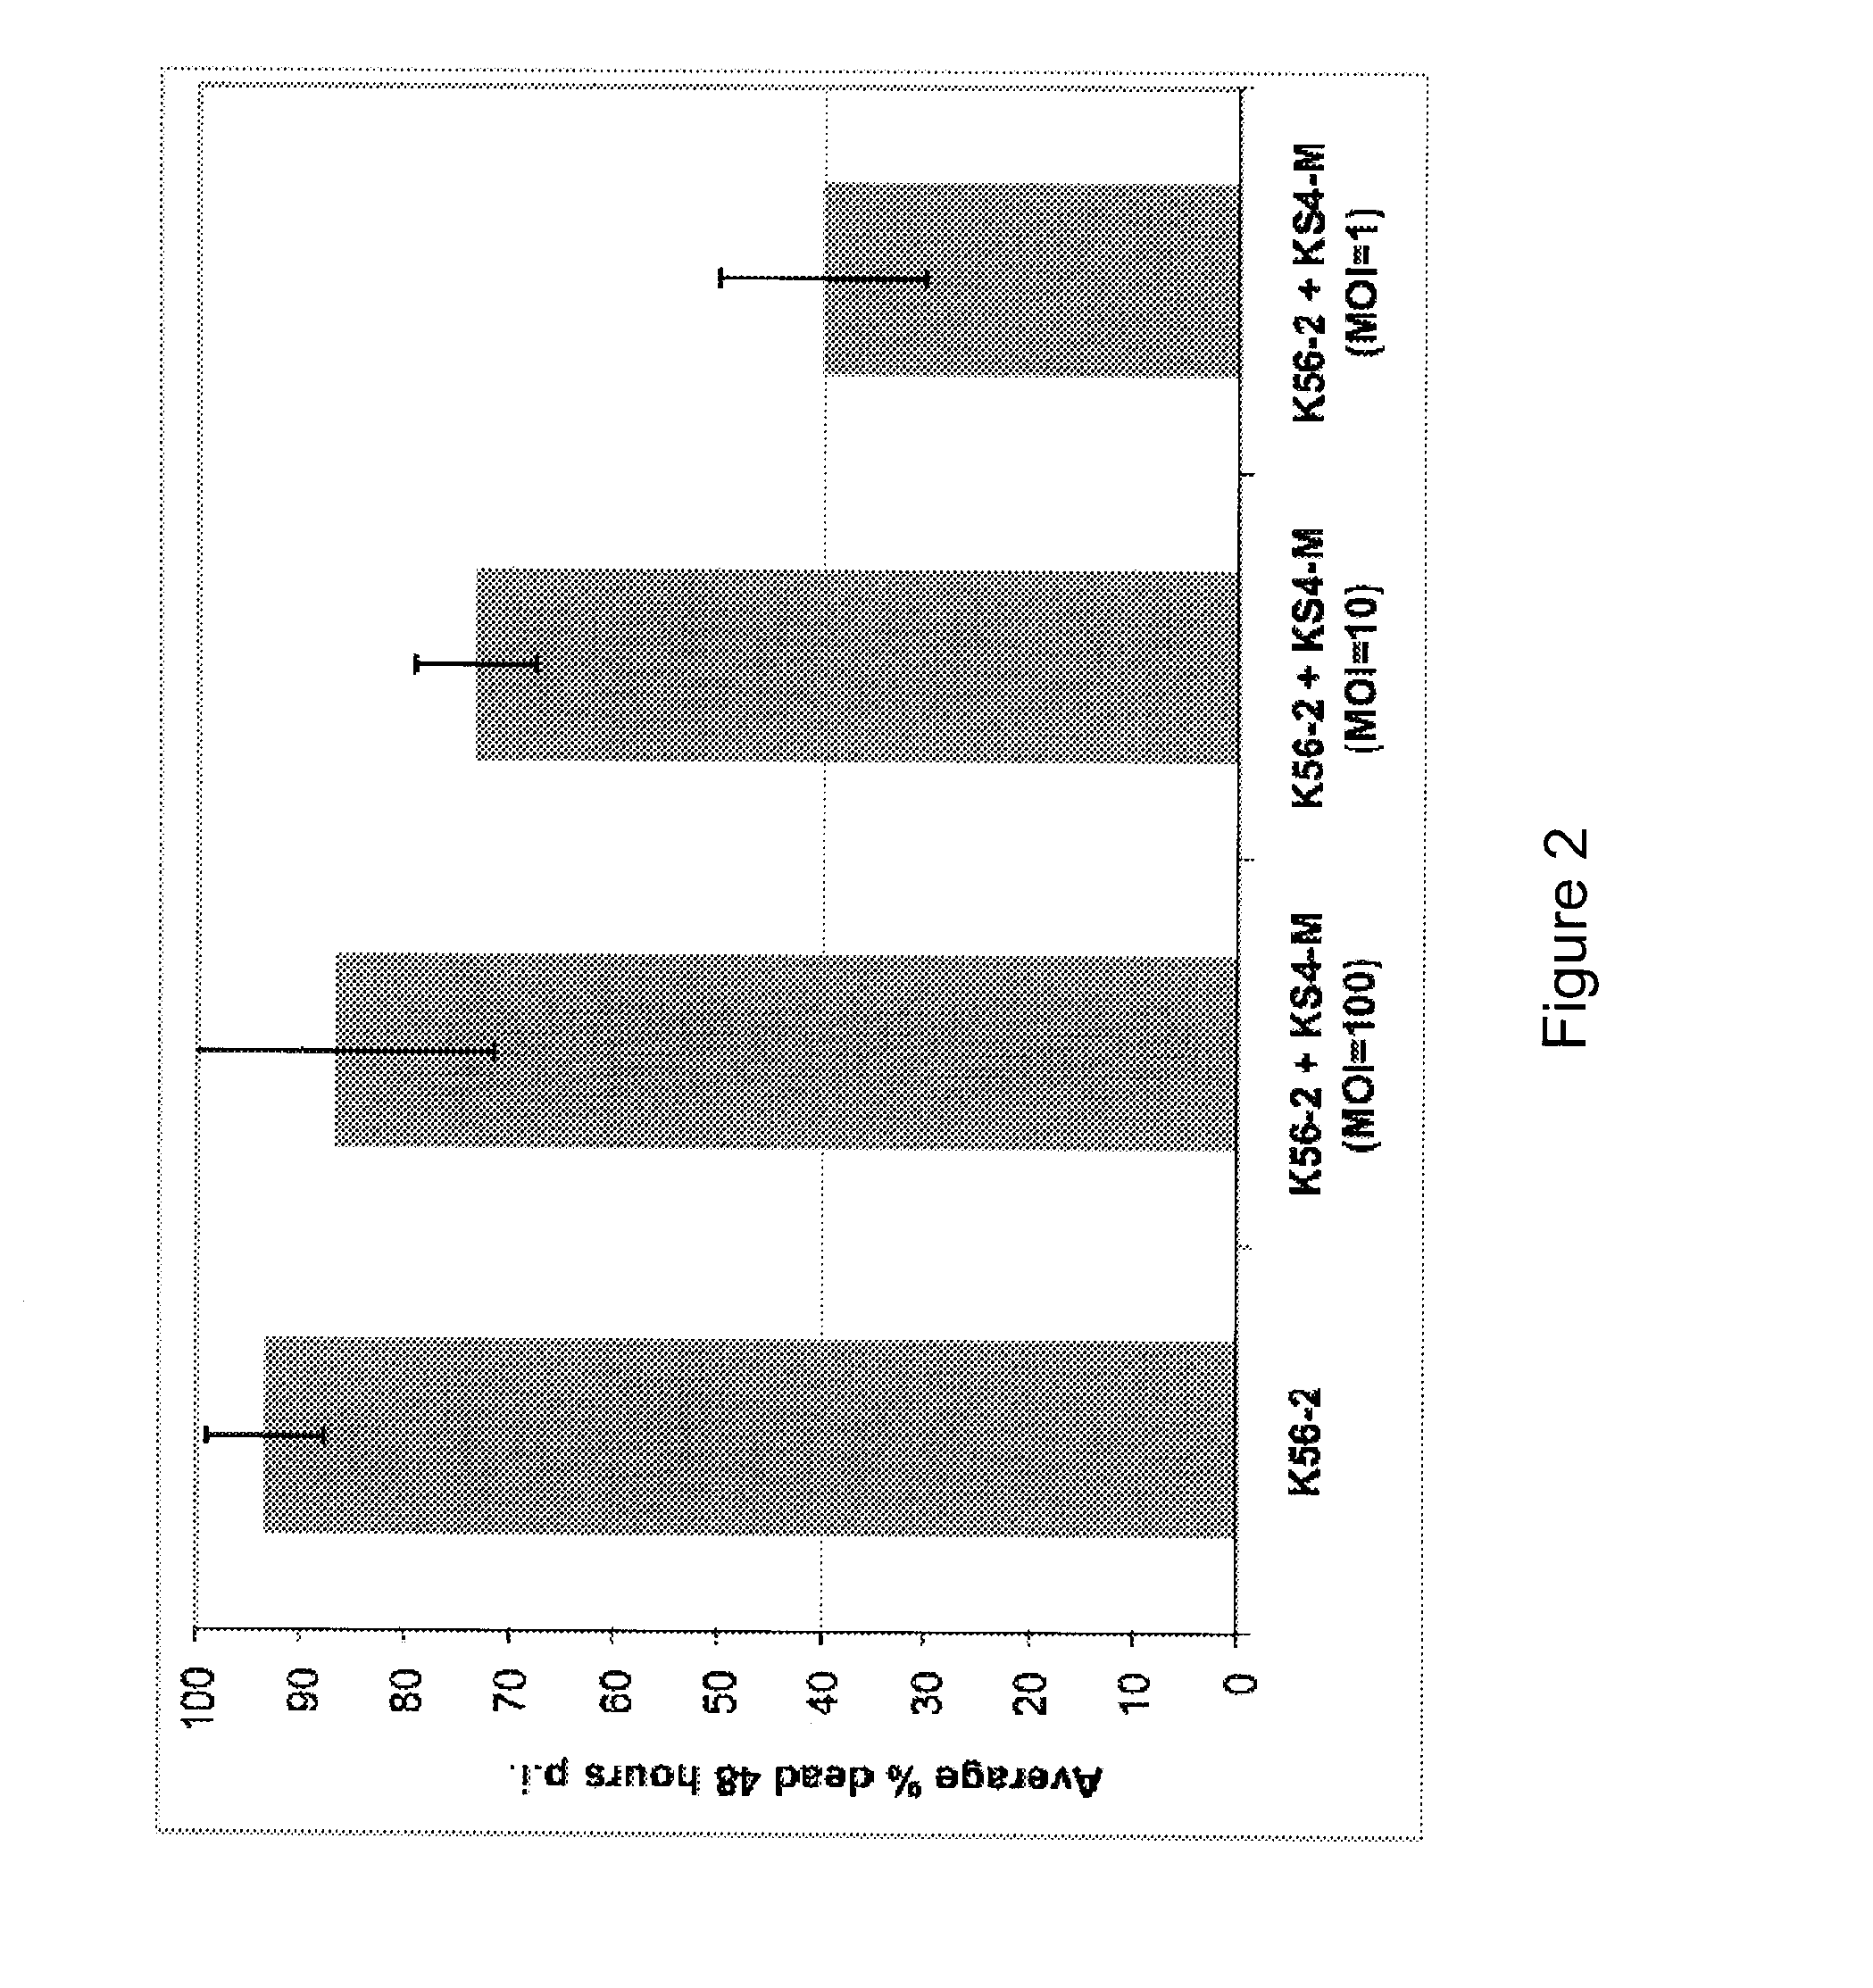 Bacteriophage compositions for treatment of bacterial infections